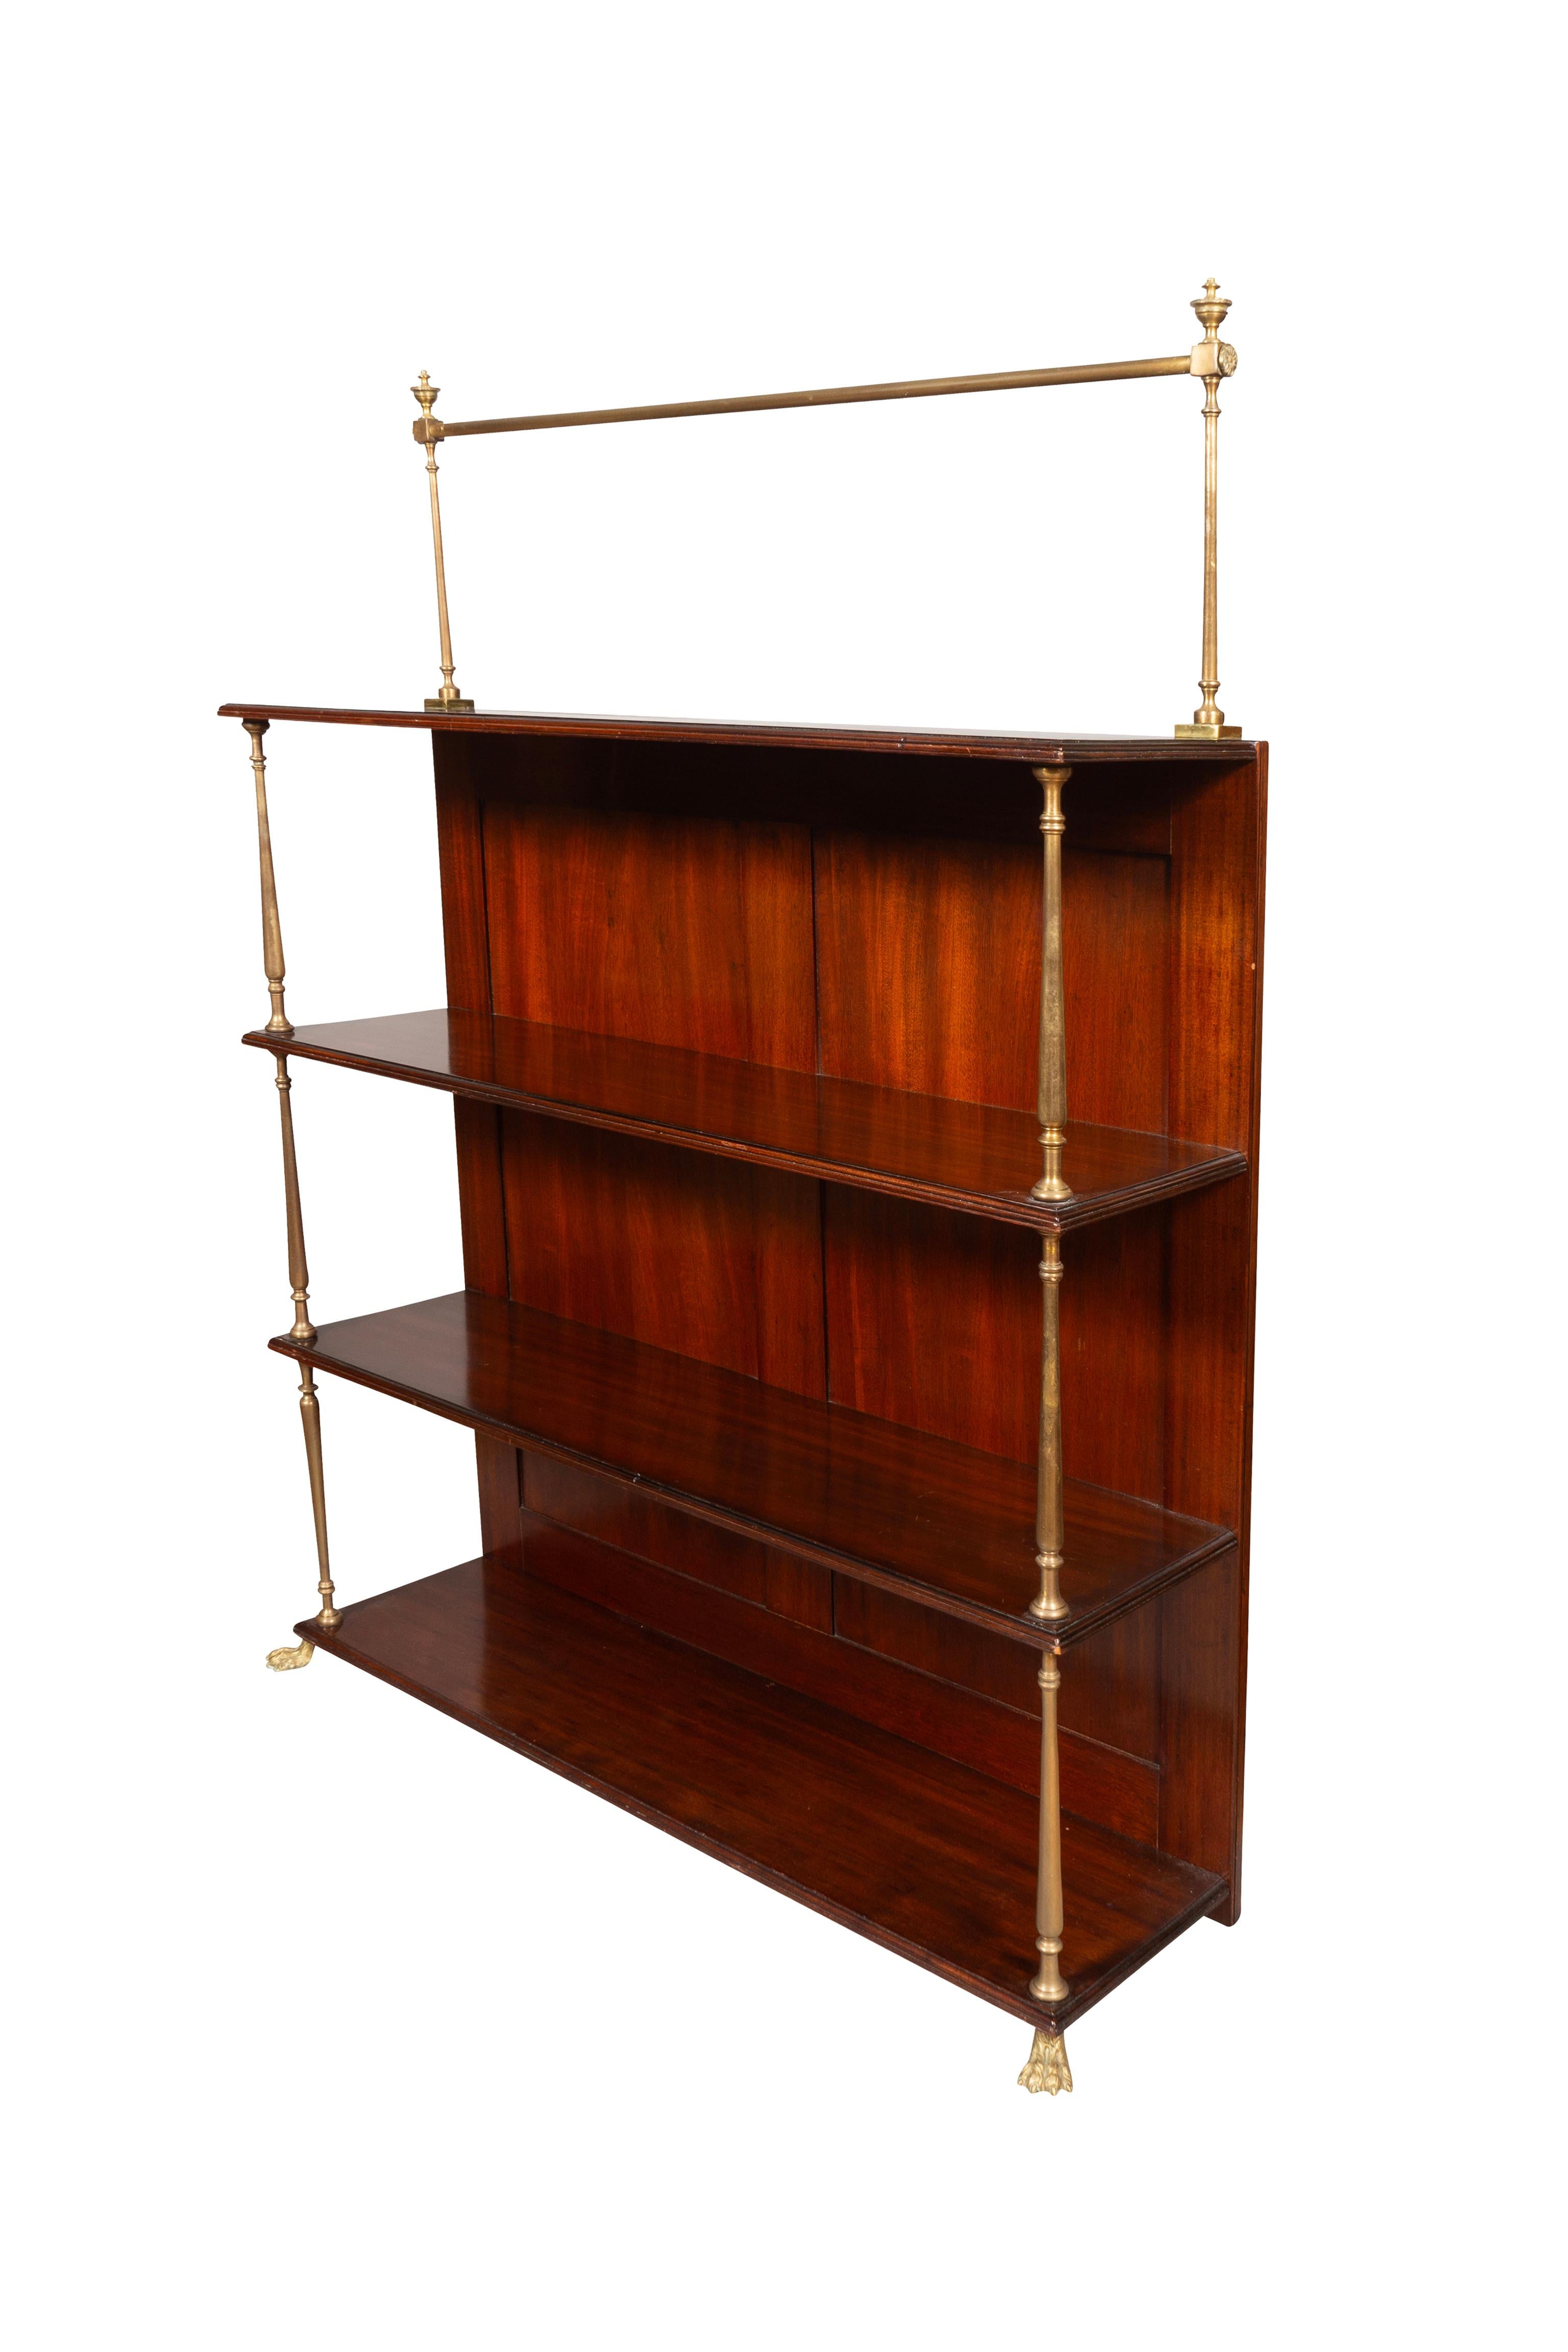 With a top brass rail over a rectangular top over three shelves with turned brass dividers, brass paw feet.